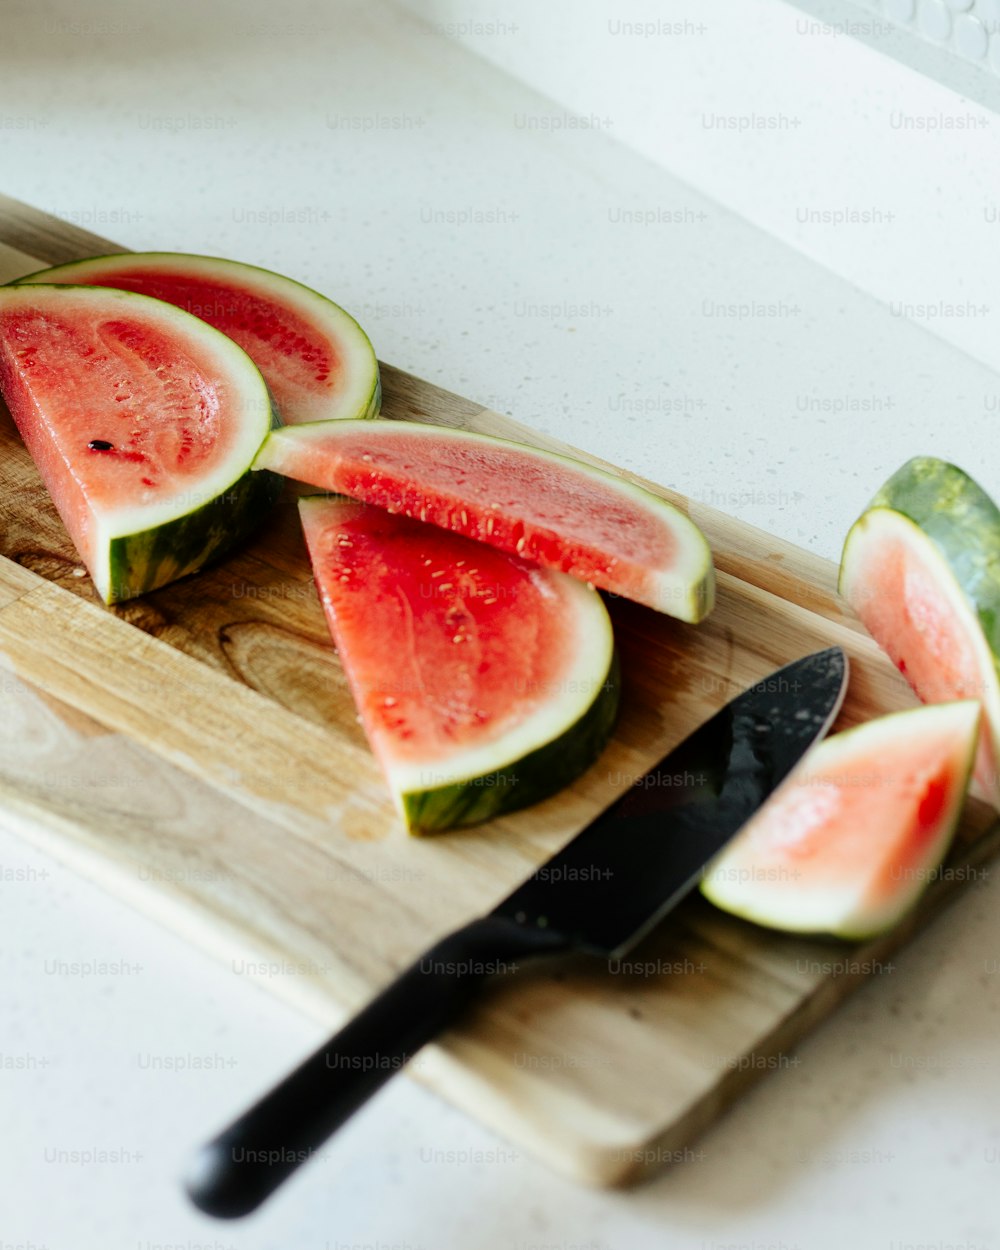 slices of watermelon on a cutting board with a knife